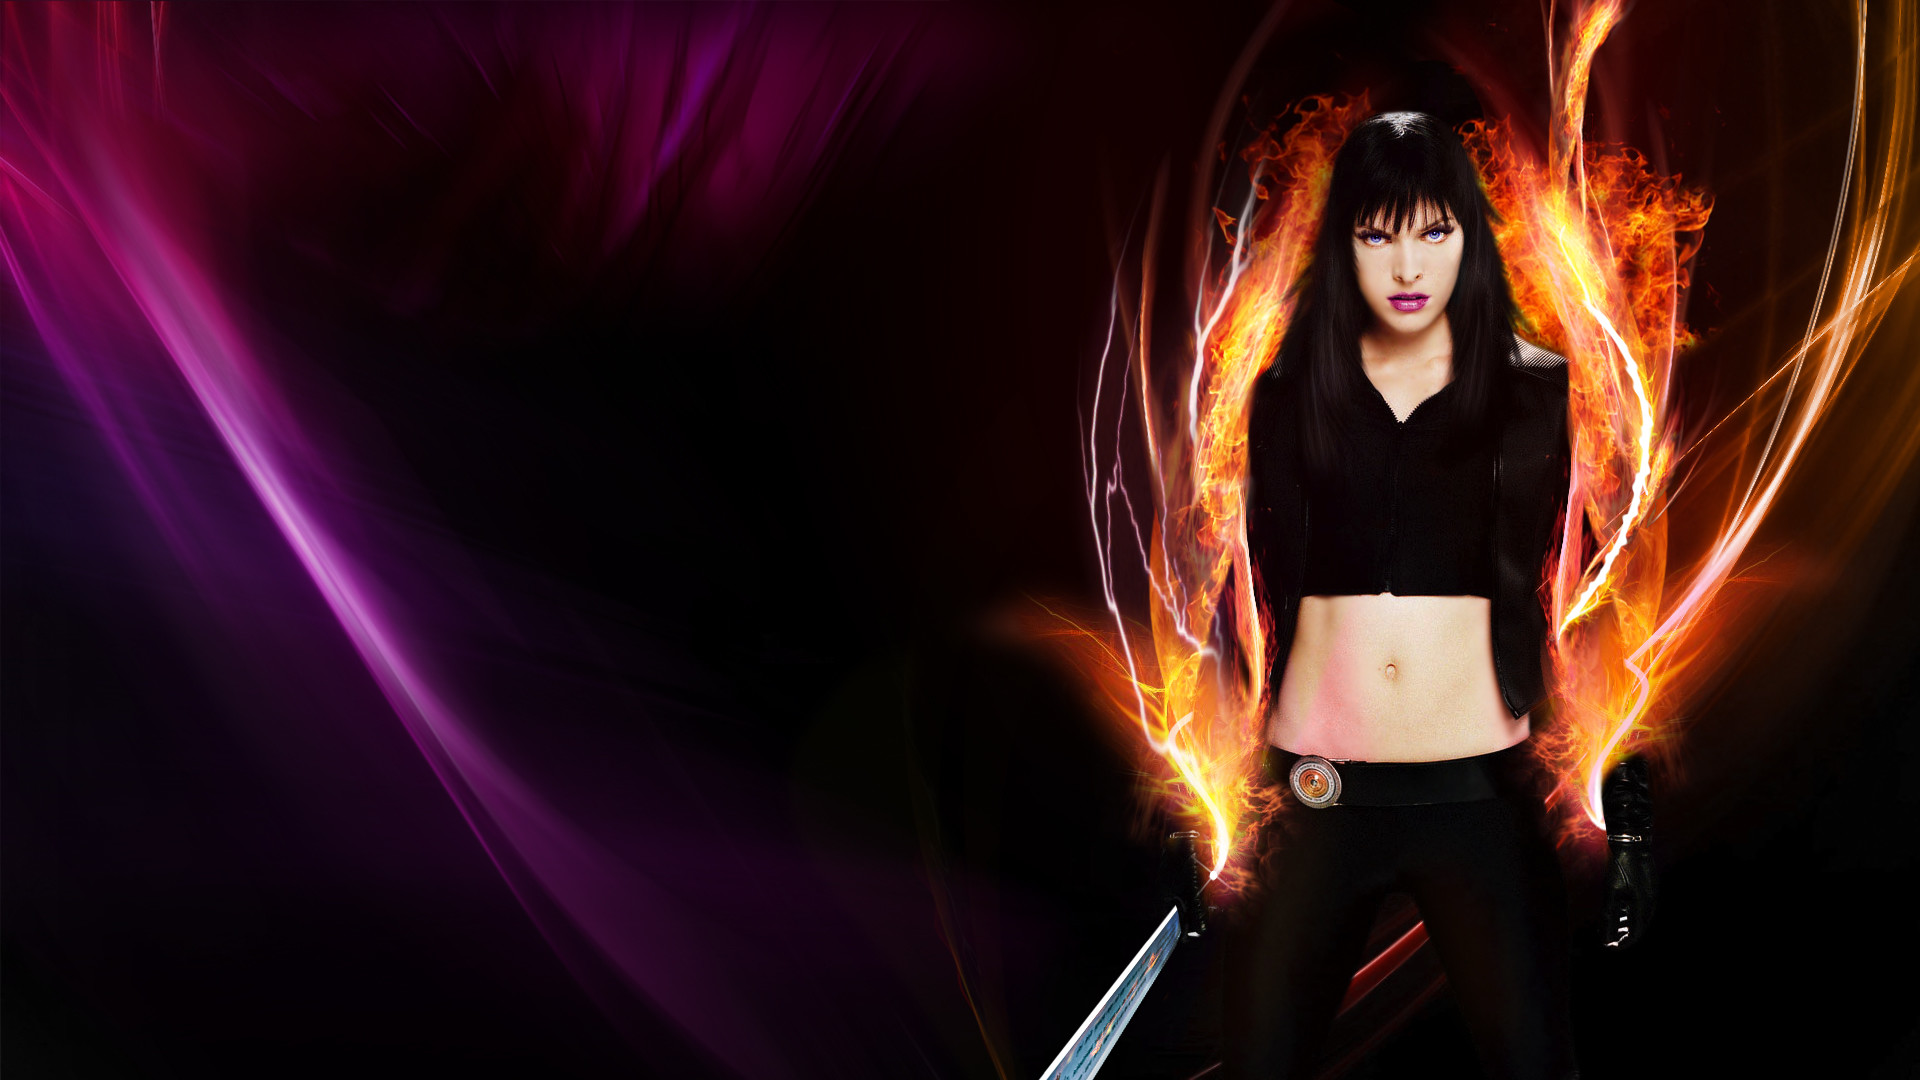 1920x1080 Ultraviolet, HD Wallpaper and background photos of Ultraviolet_MiX_Milla  for fans of Milla Jovovich images.